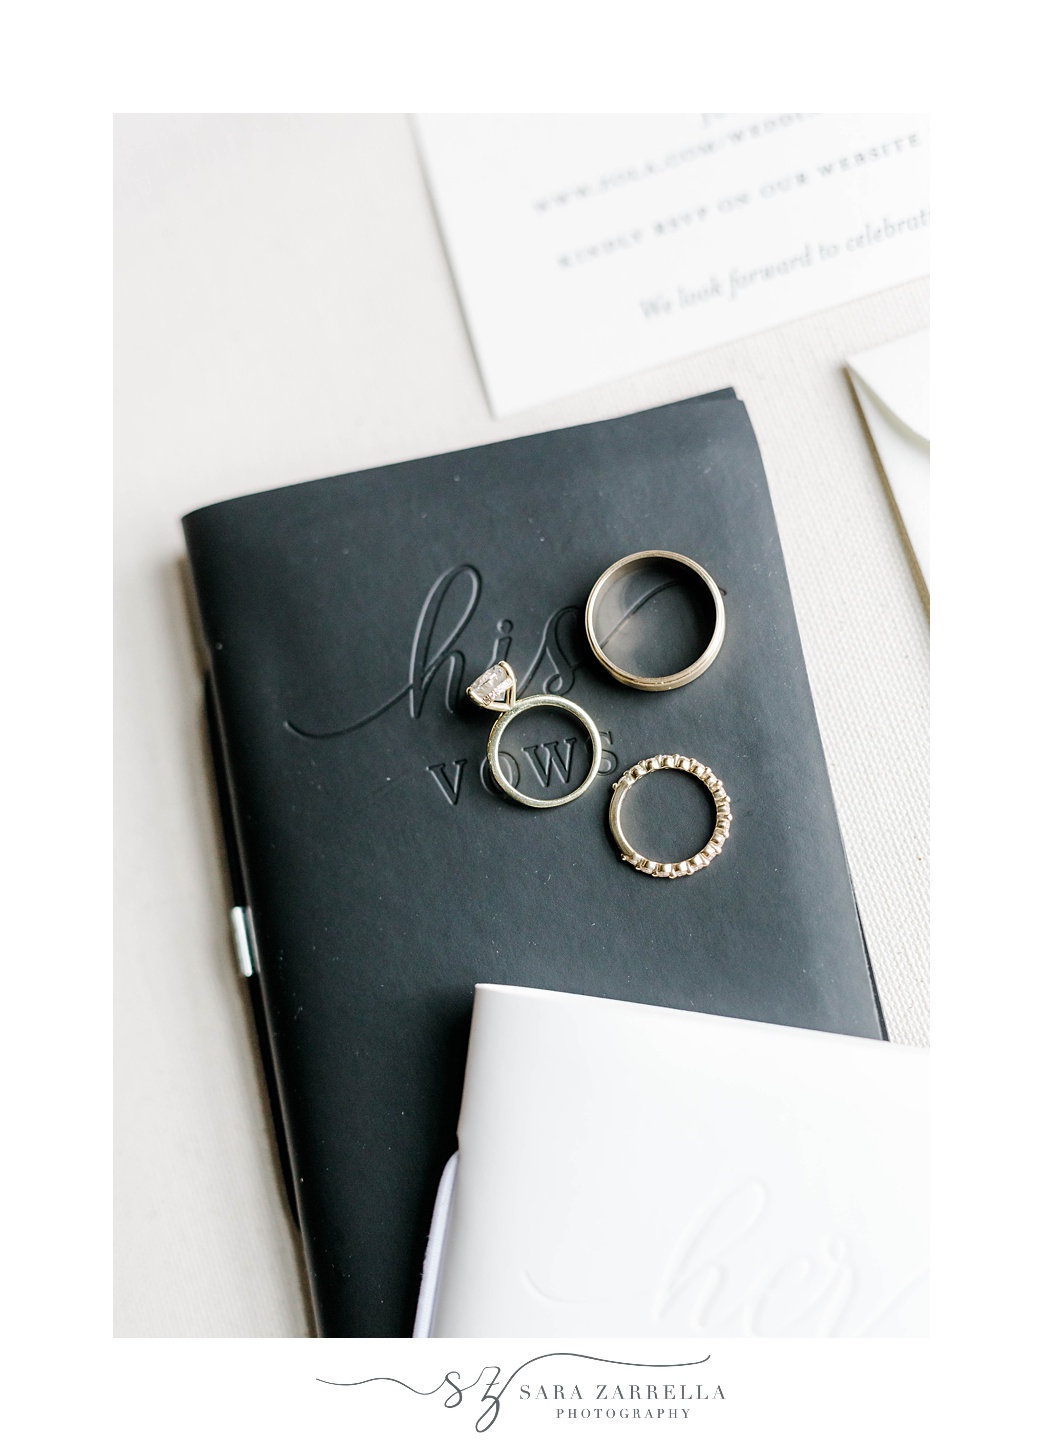 groom's vow booklet with wedding rings resting on top